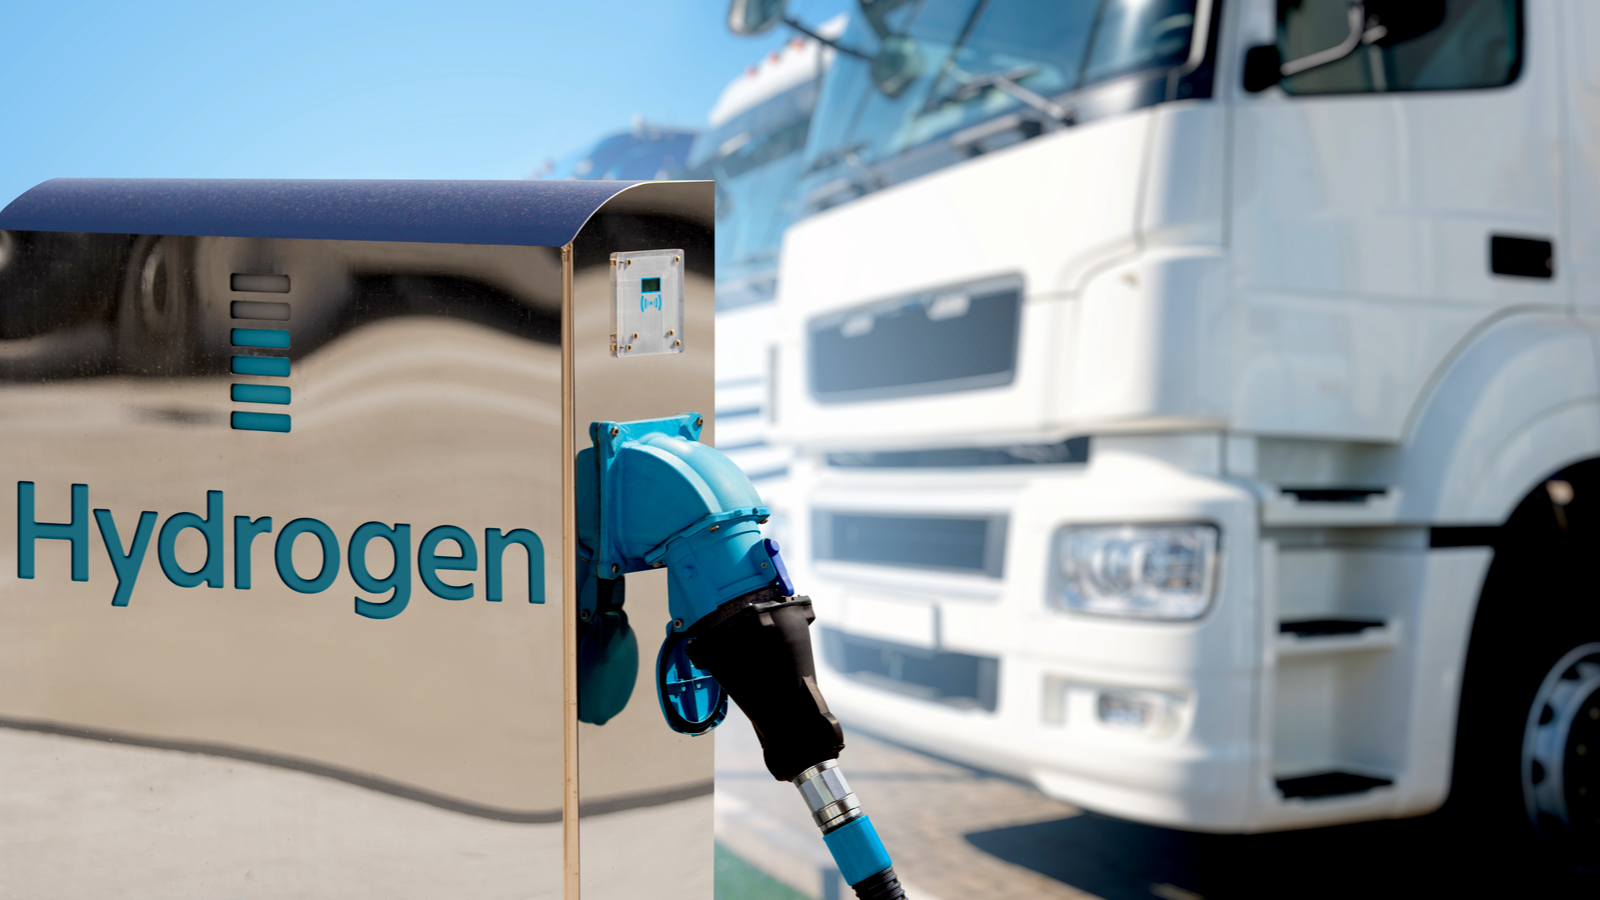 An image of a hydrogen fueling station with a truck parked in the background representing ADN stock.